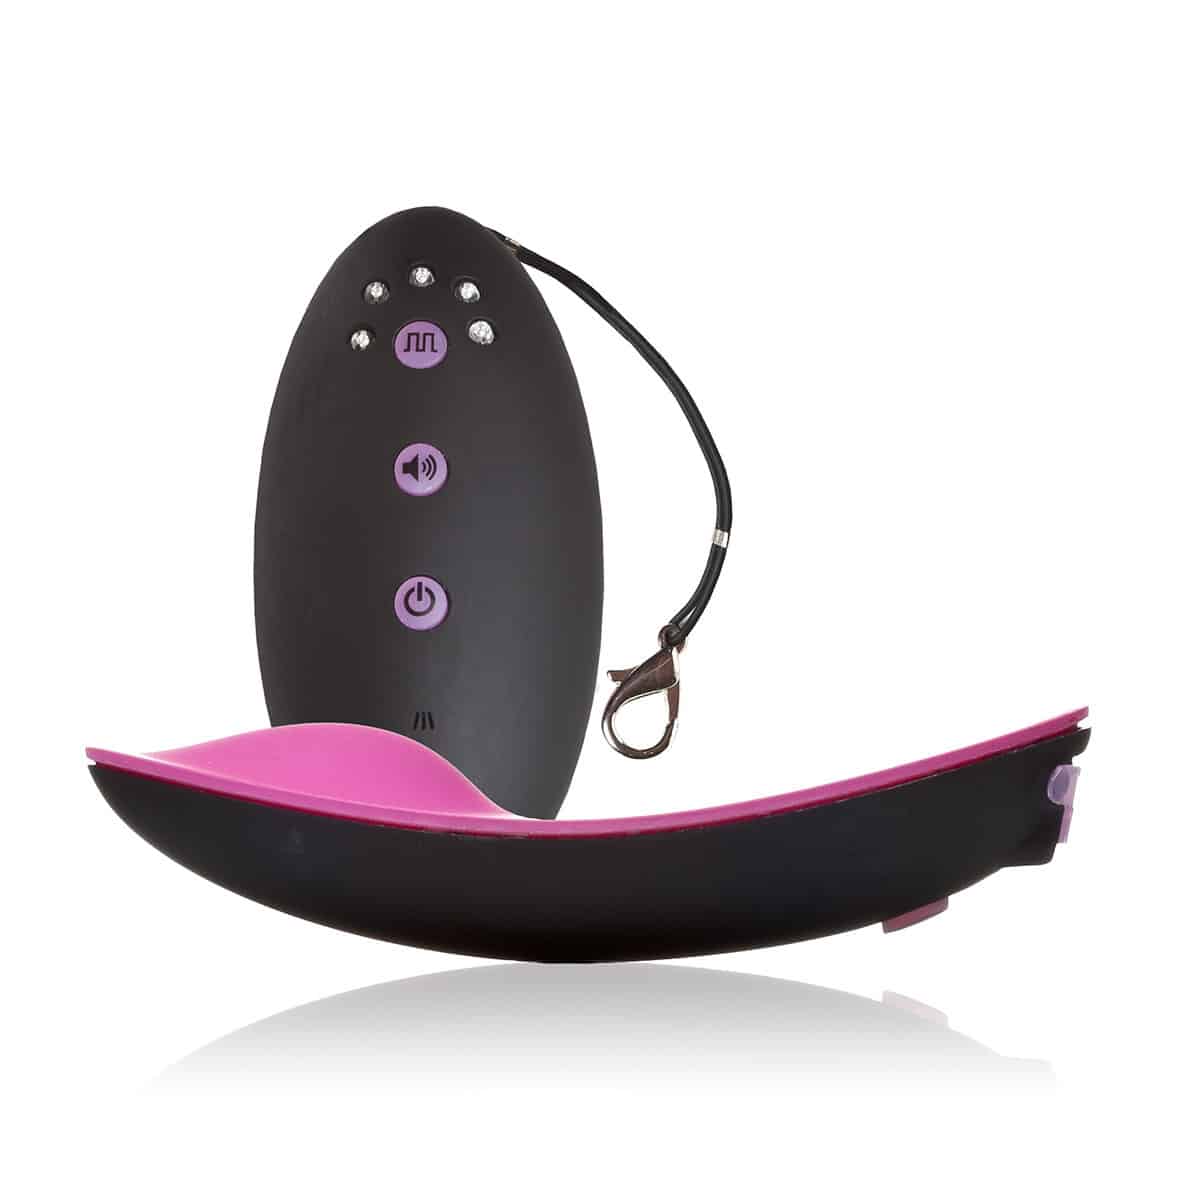 OhMiBod Club Vibe 2.0 vibrator and remote (side view)